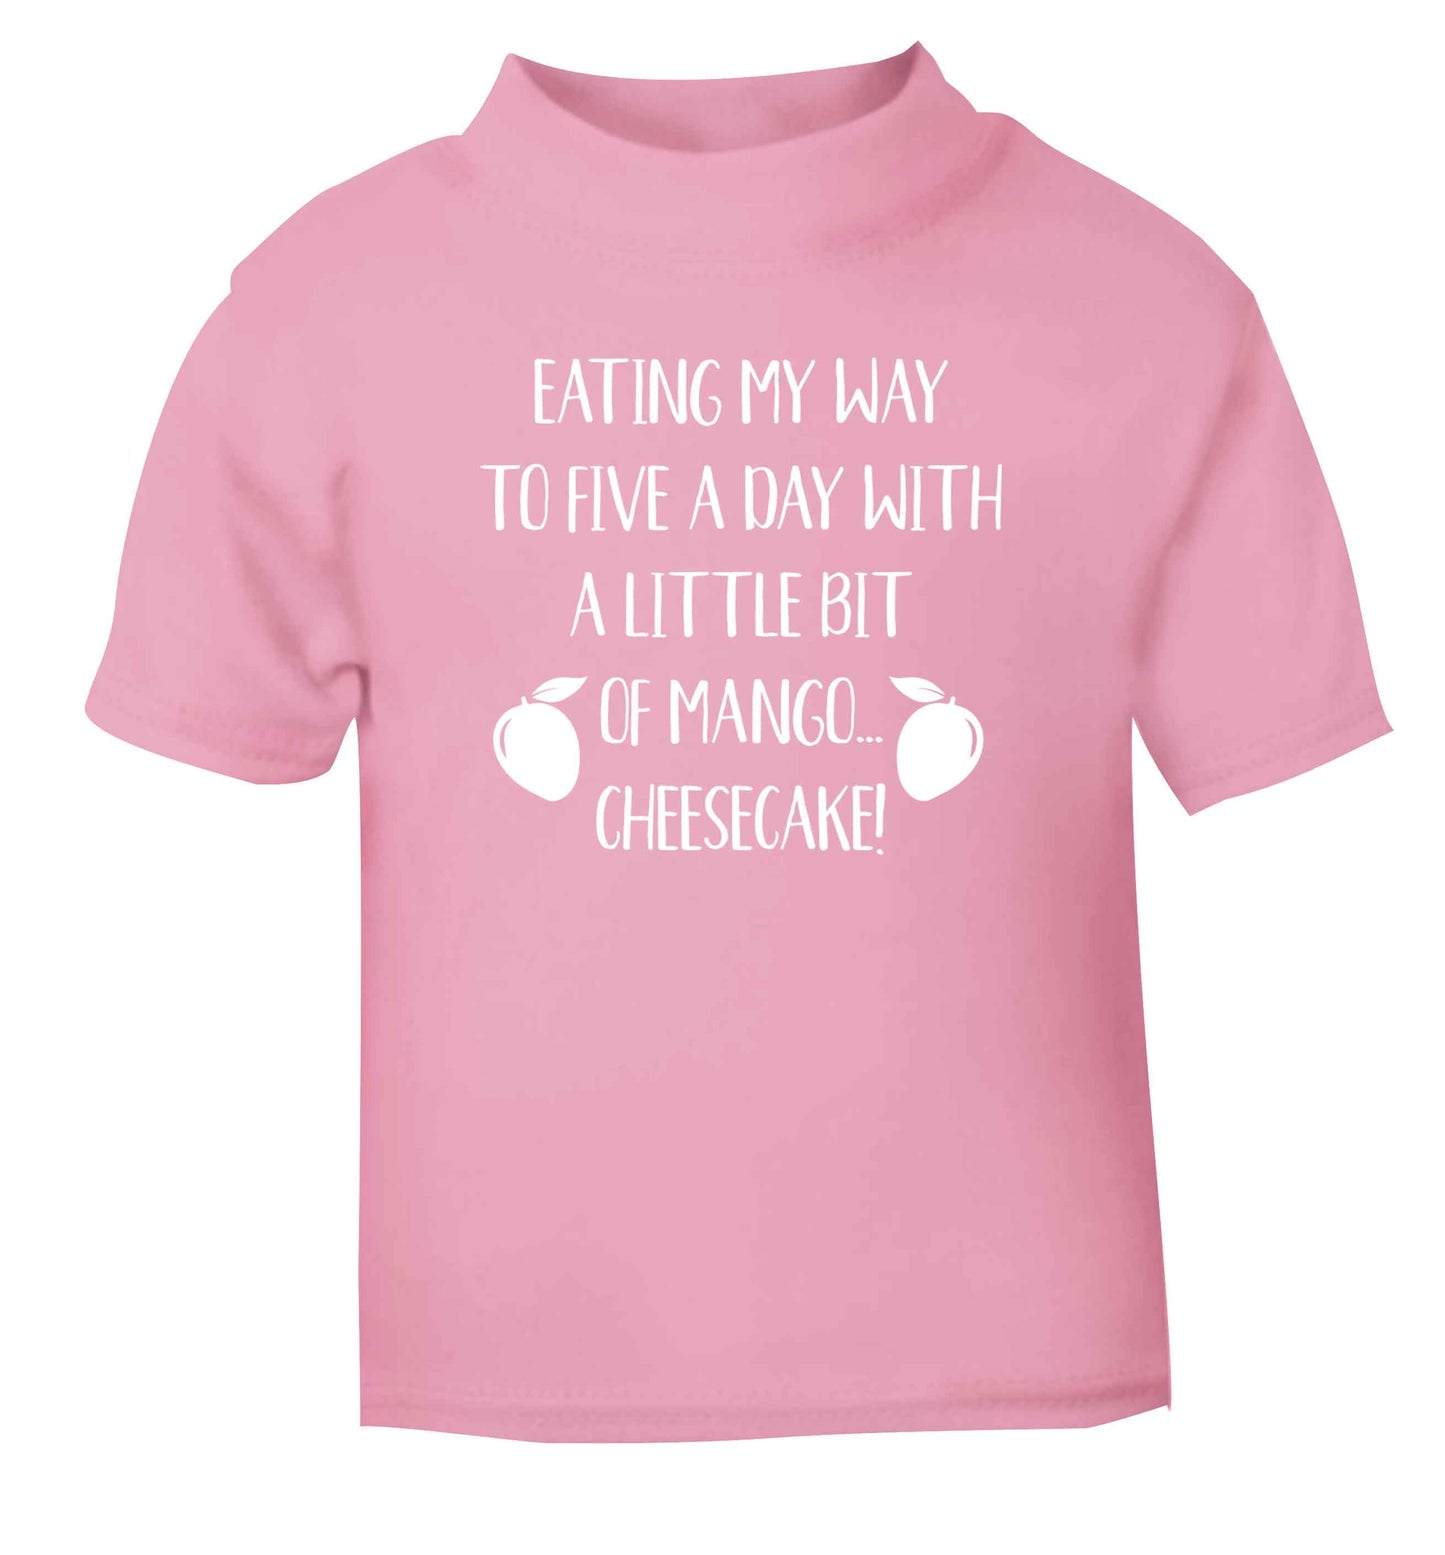 Eating my way to five a day with a little bit of mango cheesecake light pink Baby Toddler Tshirt 2 Years